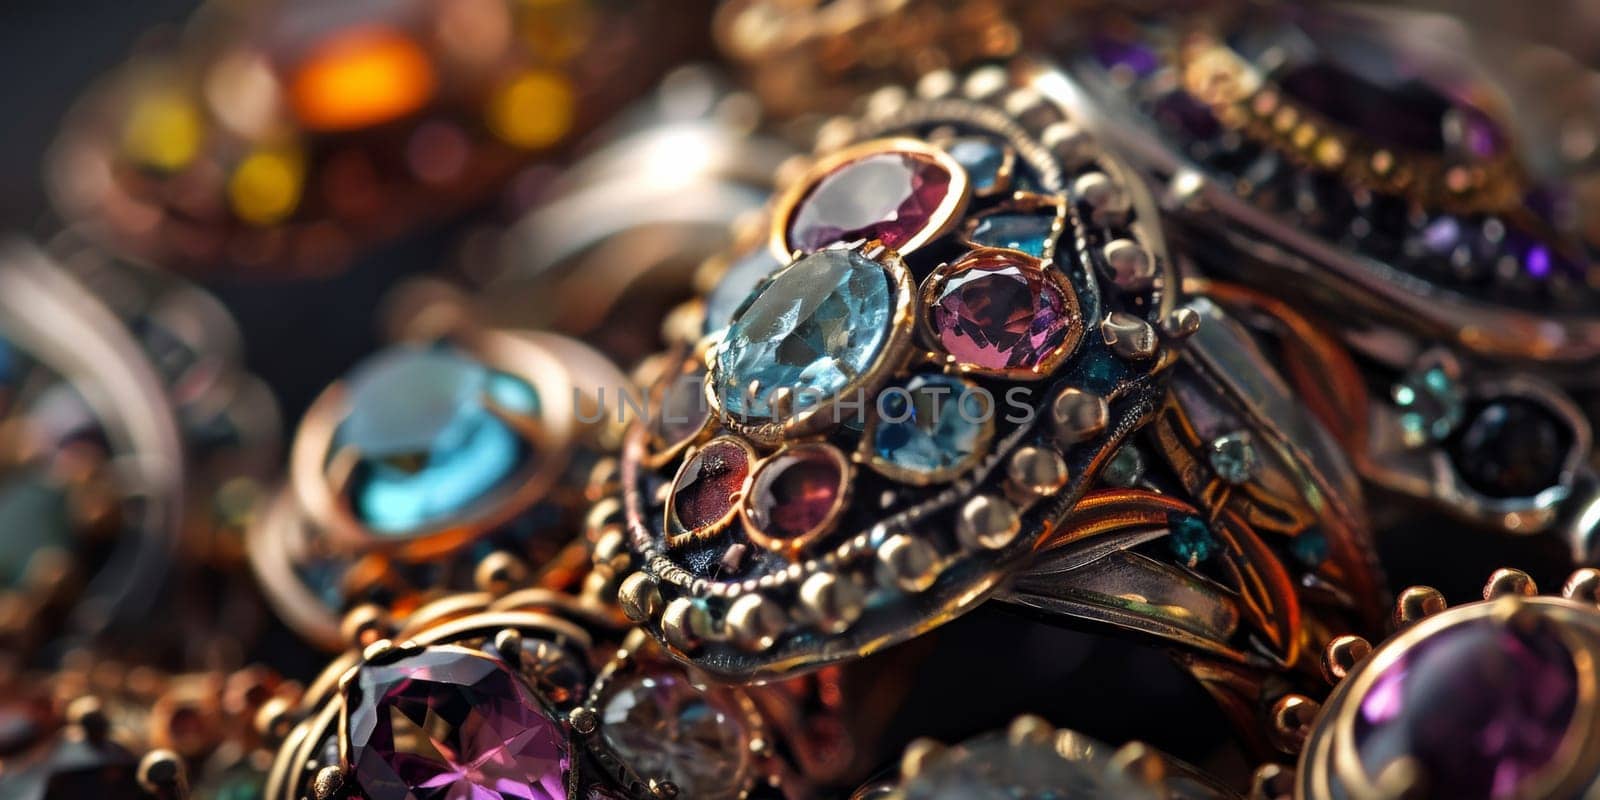 Details of jewelry pieces such as rings, necklaces, or earrings, highlighting the gemstones, metalwork, and surface finishes by Kadula